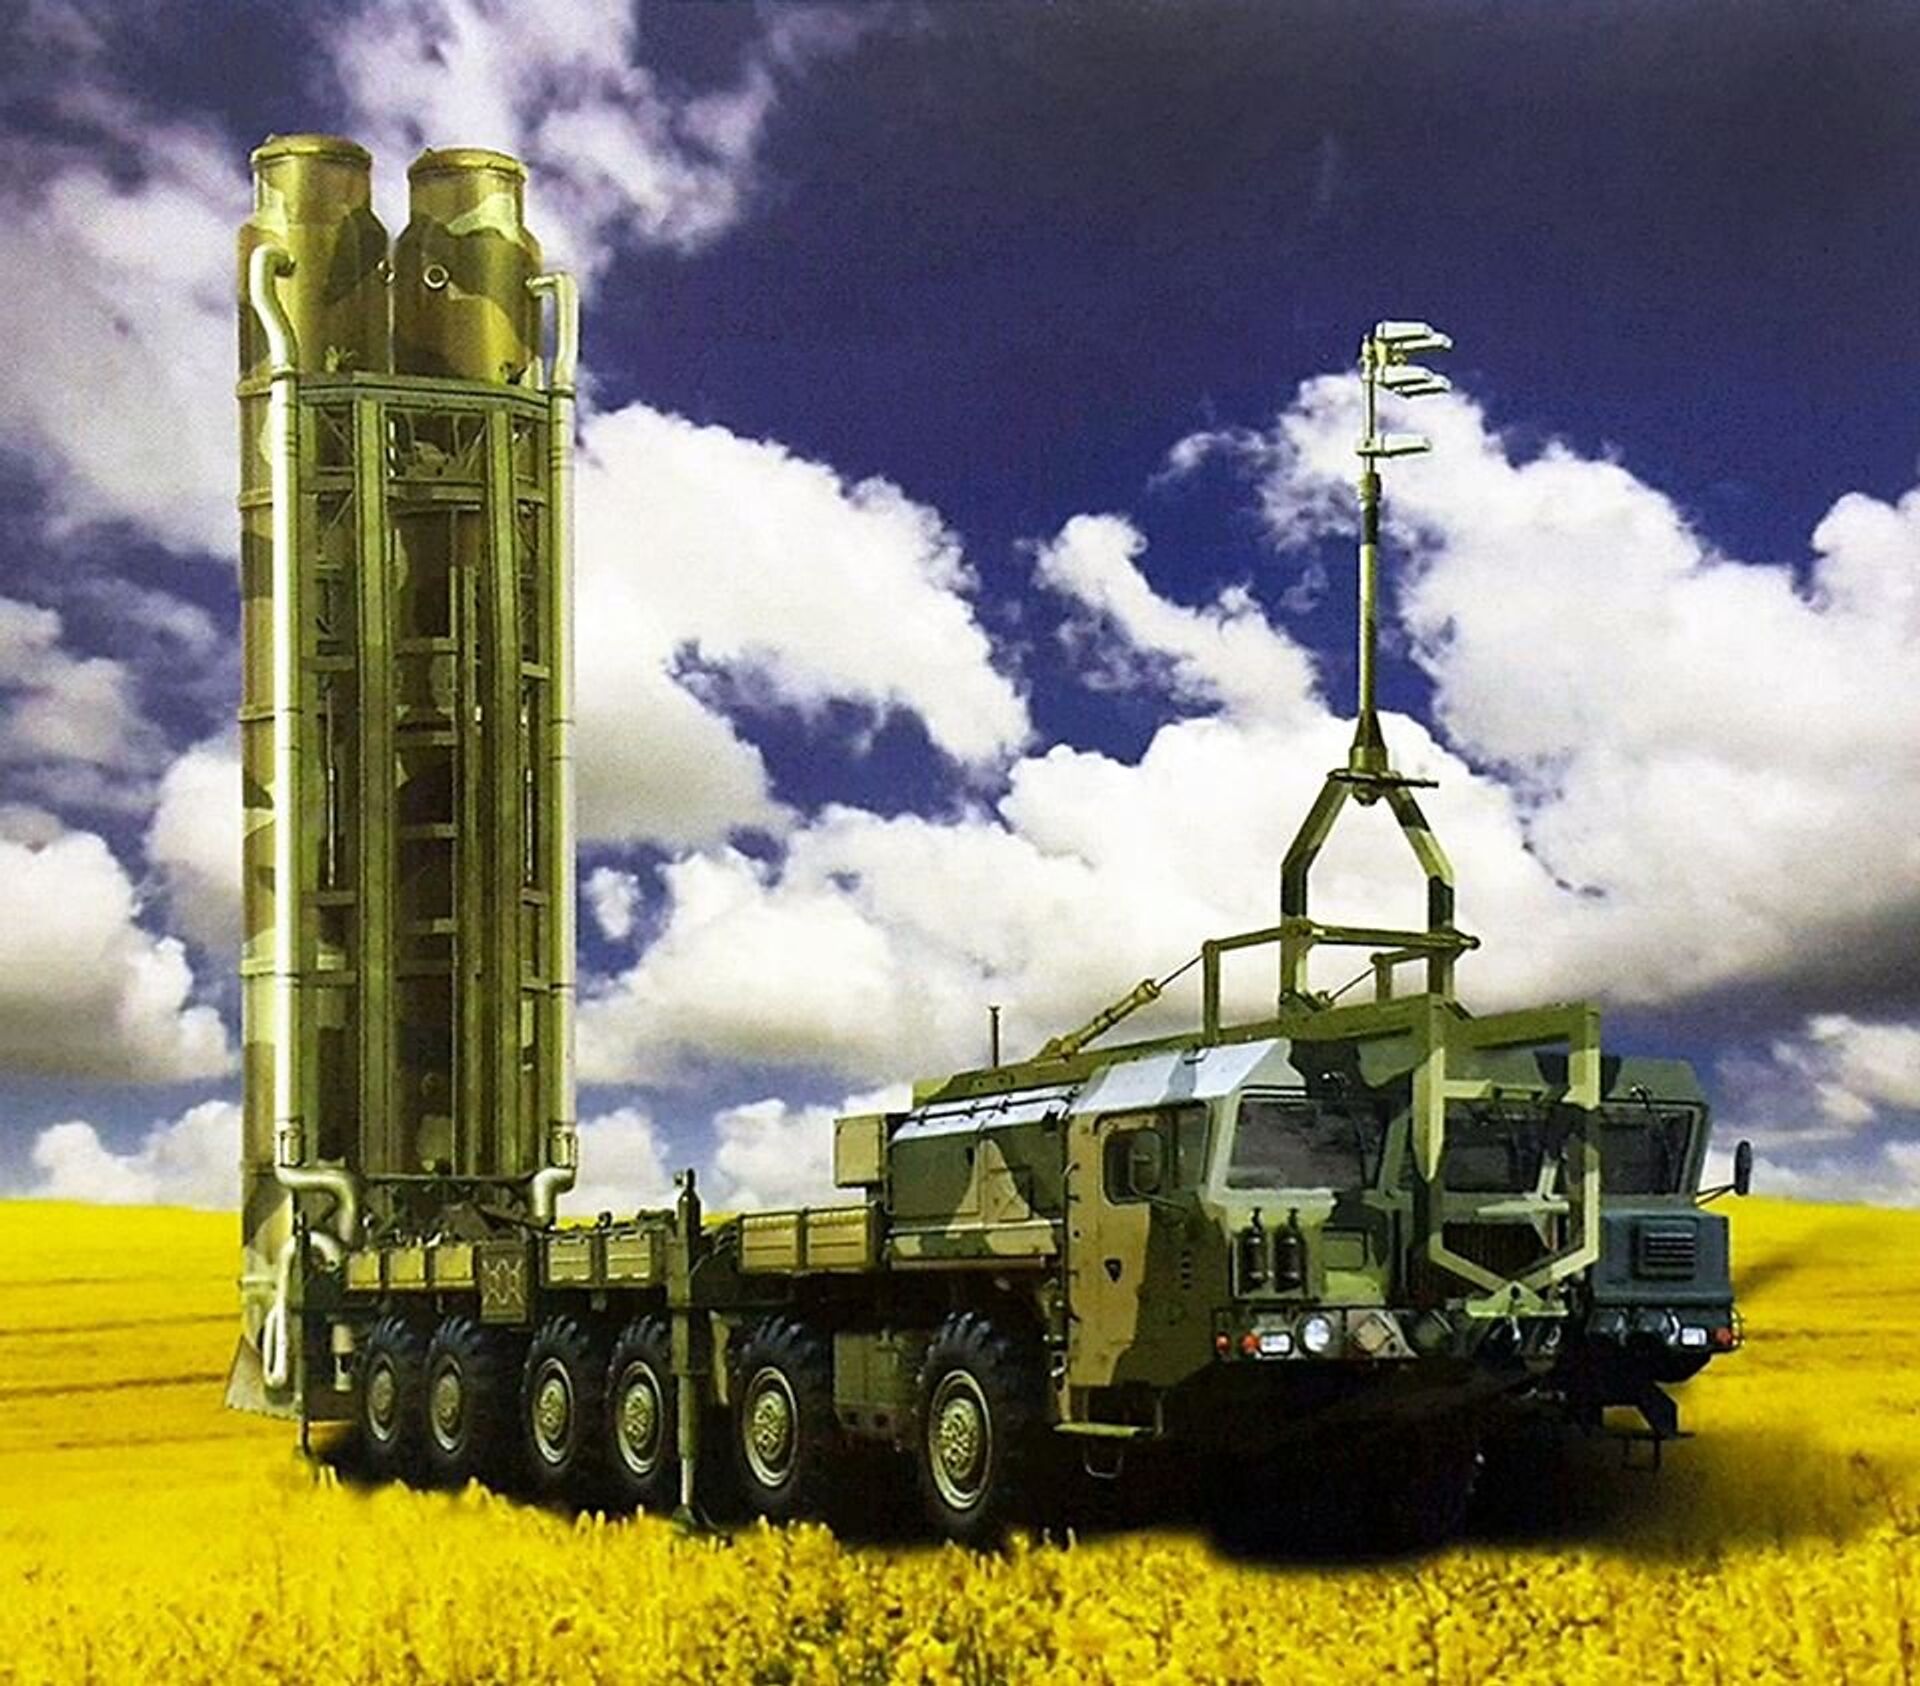 Image of the Nudol anti-satellite missile system posted on a Russian website. - Sputnik International, 1920, 30.11.2022